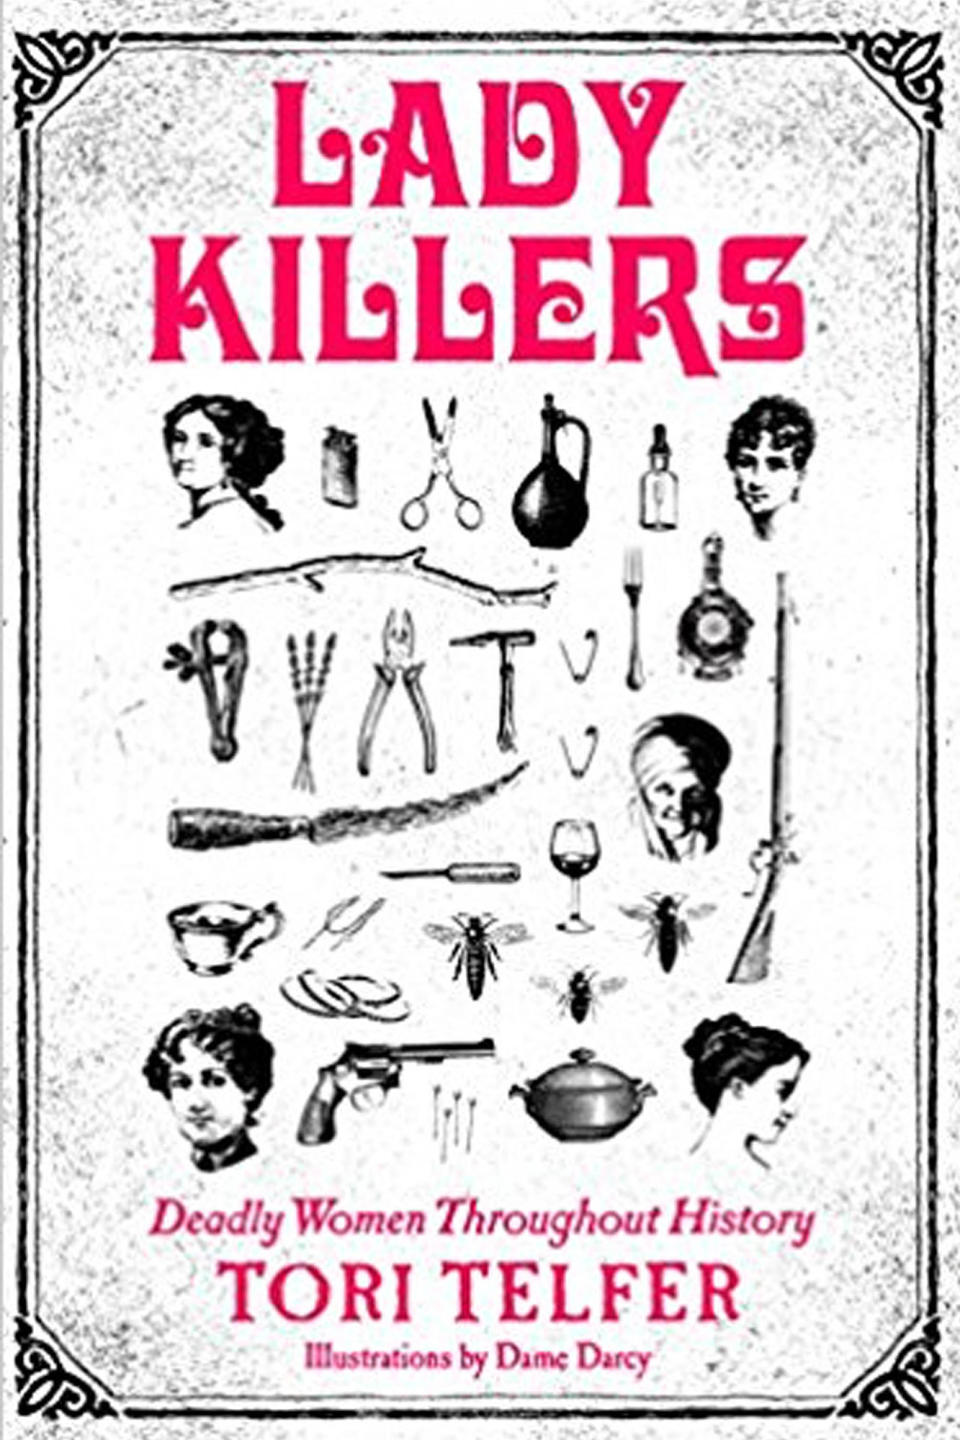 Lady Killers: Deadly Women Throughout History 
 by Tori Telfer